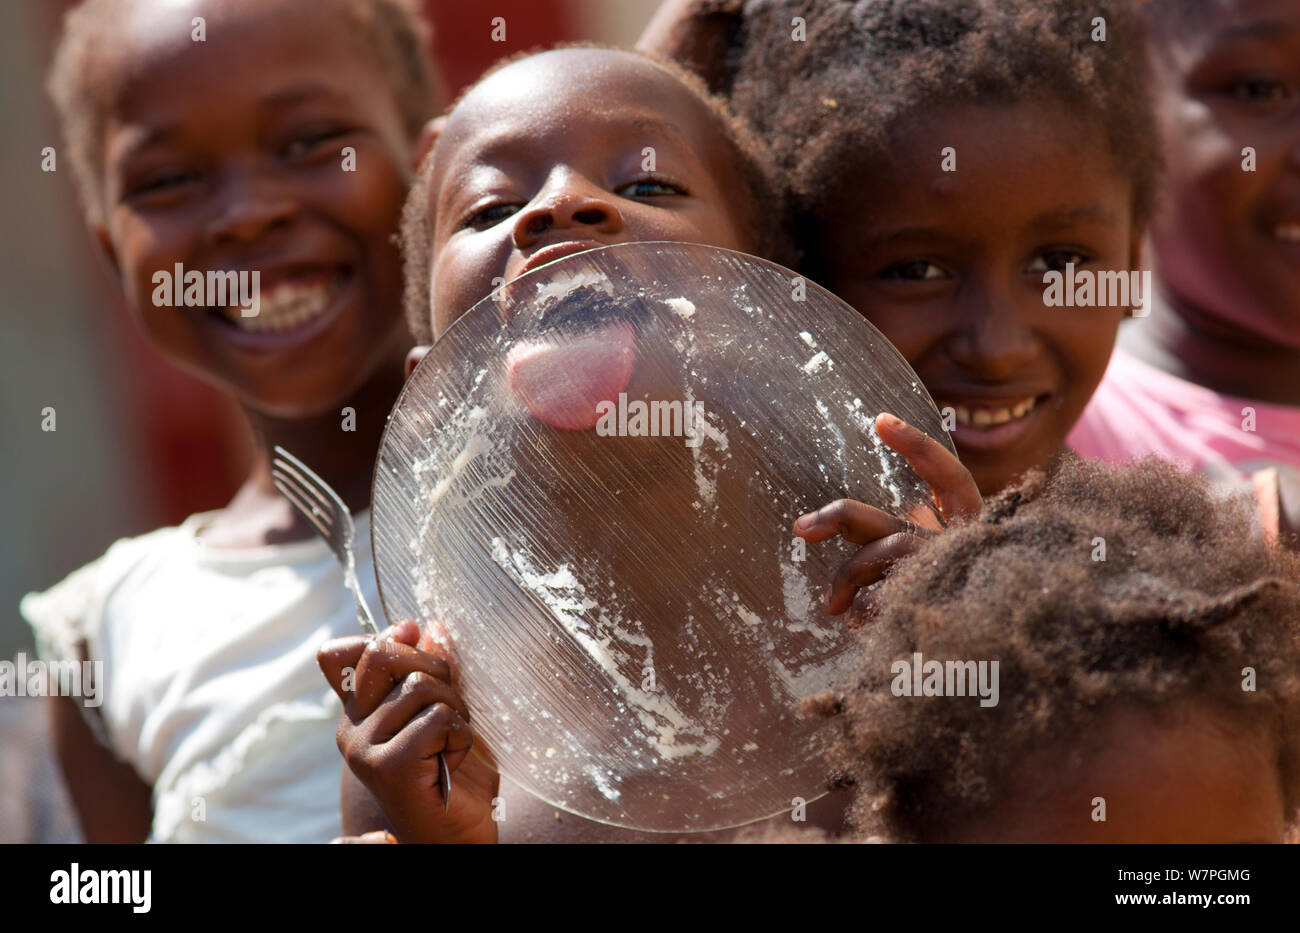 A hungry girl licking plate clean, at a street market vendor in the city of Sao Tomeon the Atlantic Ocean islands of Sao Tome & Principe, February 2009 Stock Photo